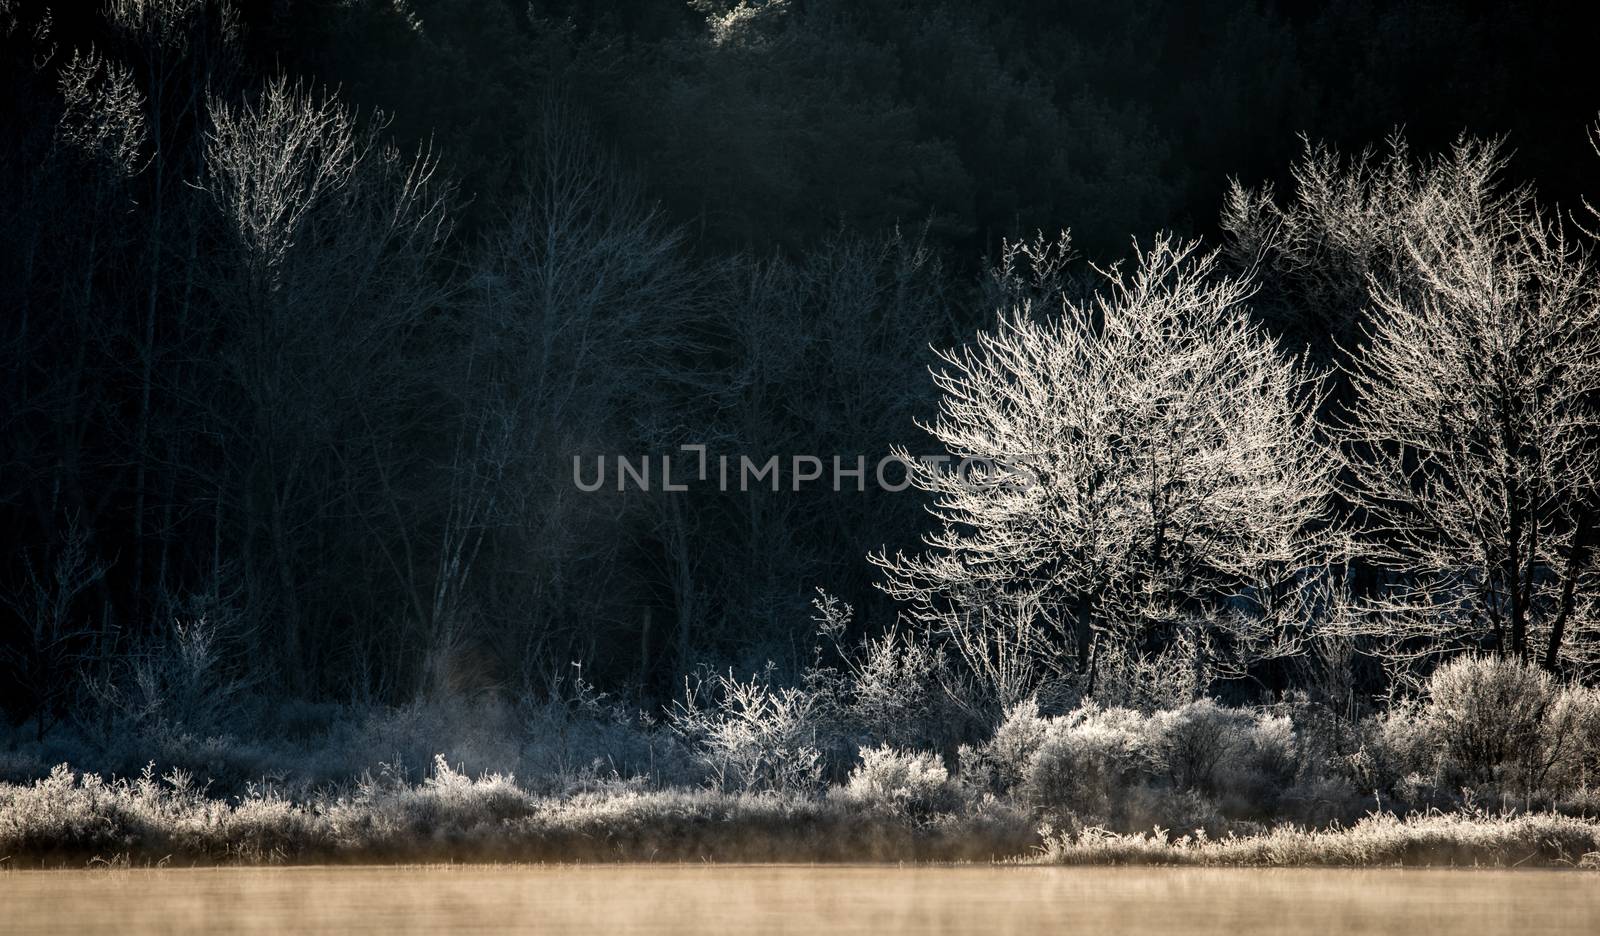 Trees and bushes at the lake's edge, glow and shine with coats of fresh frost bathed in sunlight.